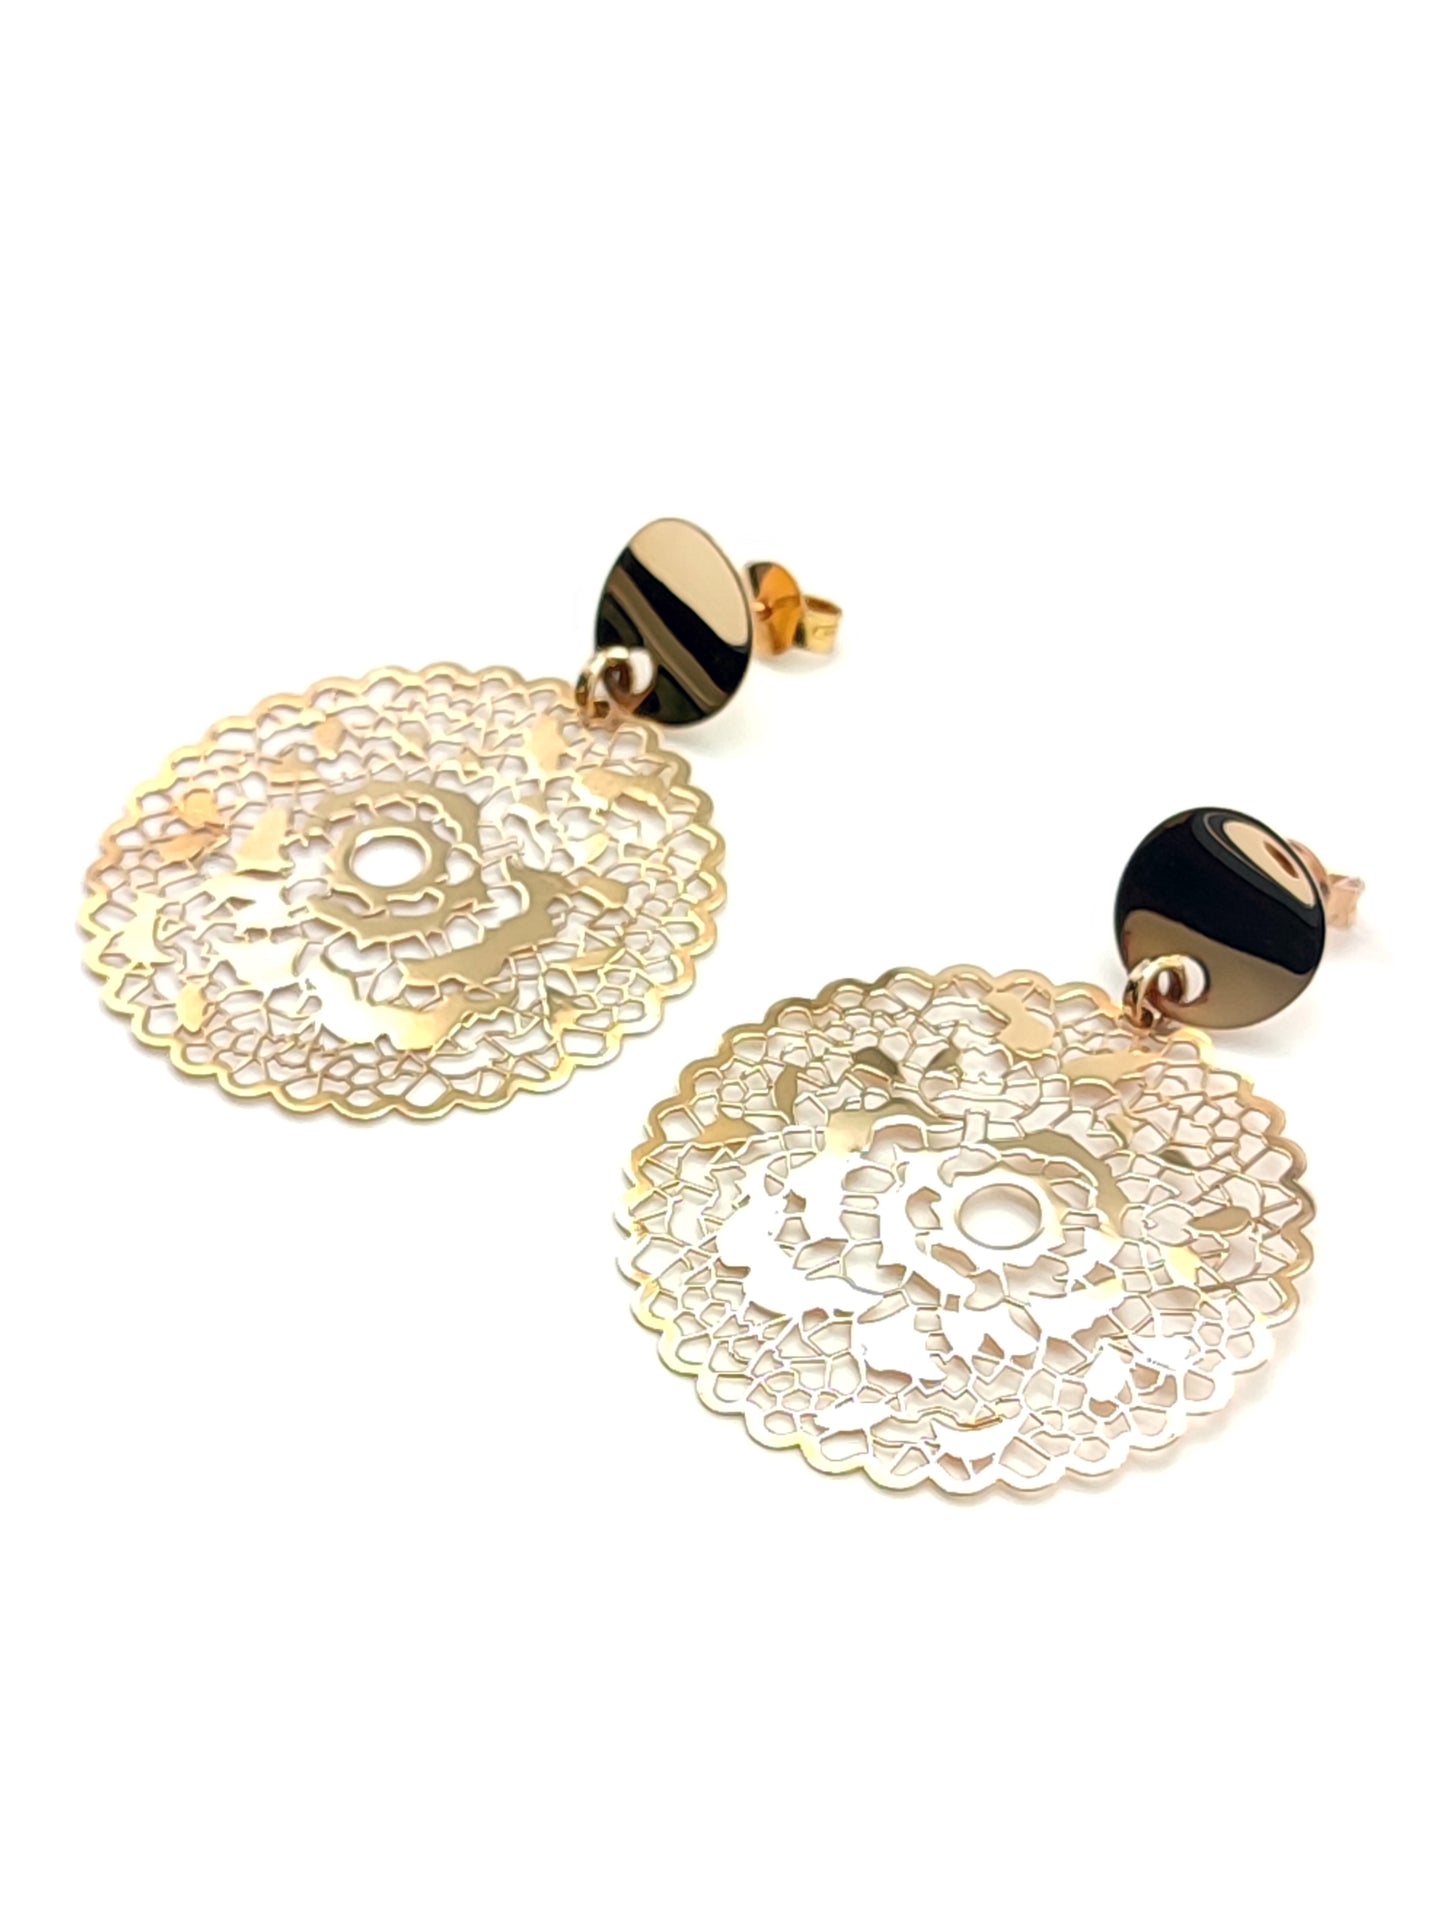 Dangle gold earrings worked with fretwork